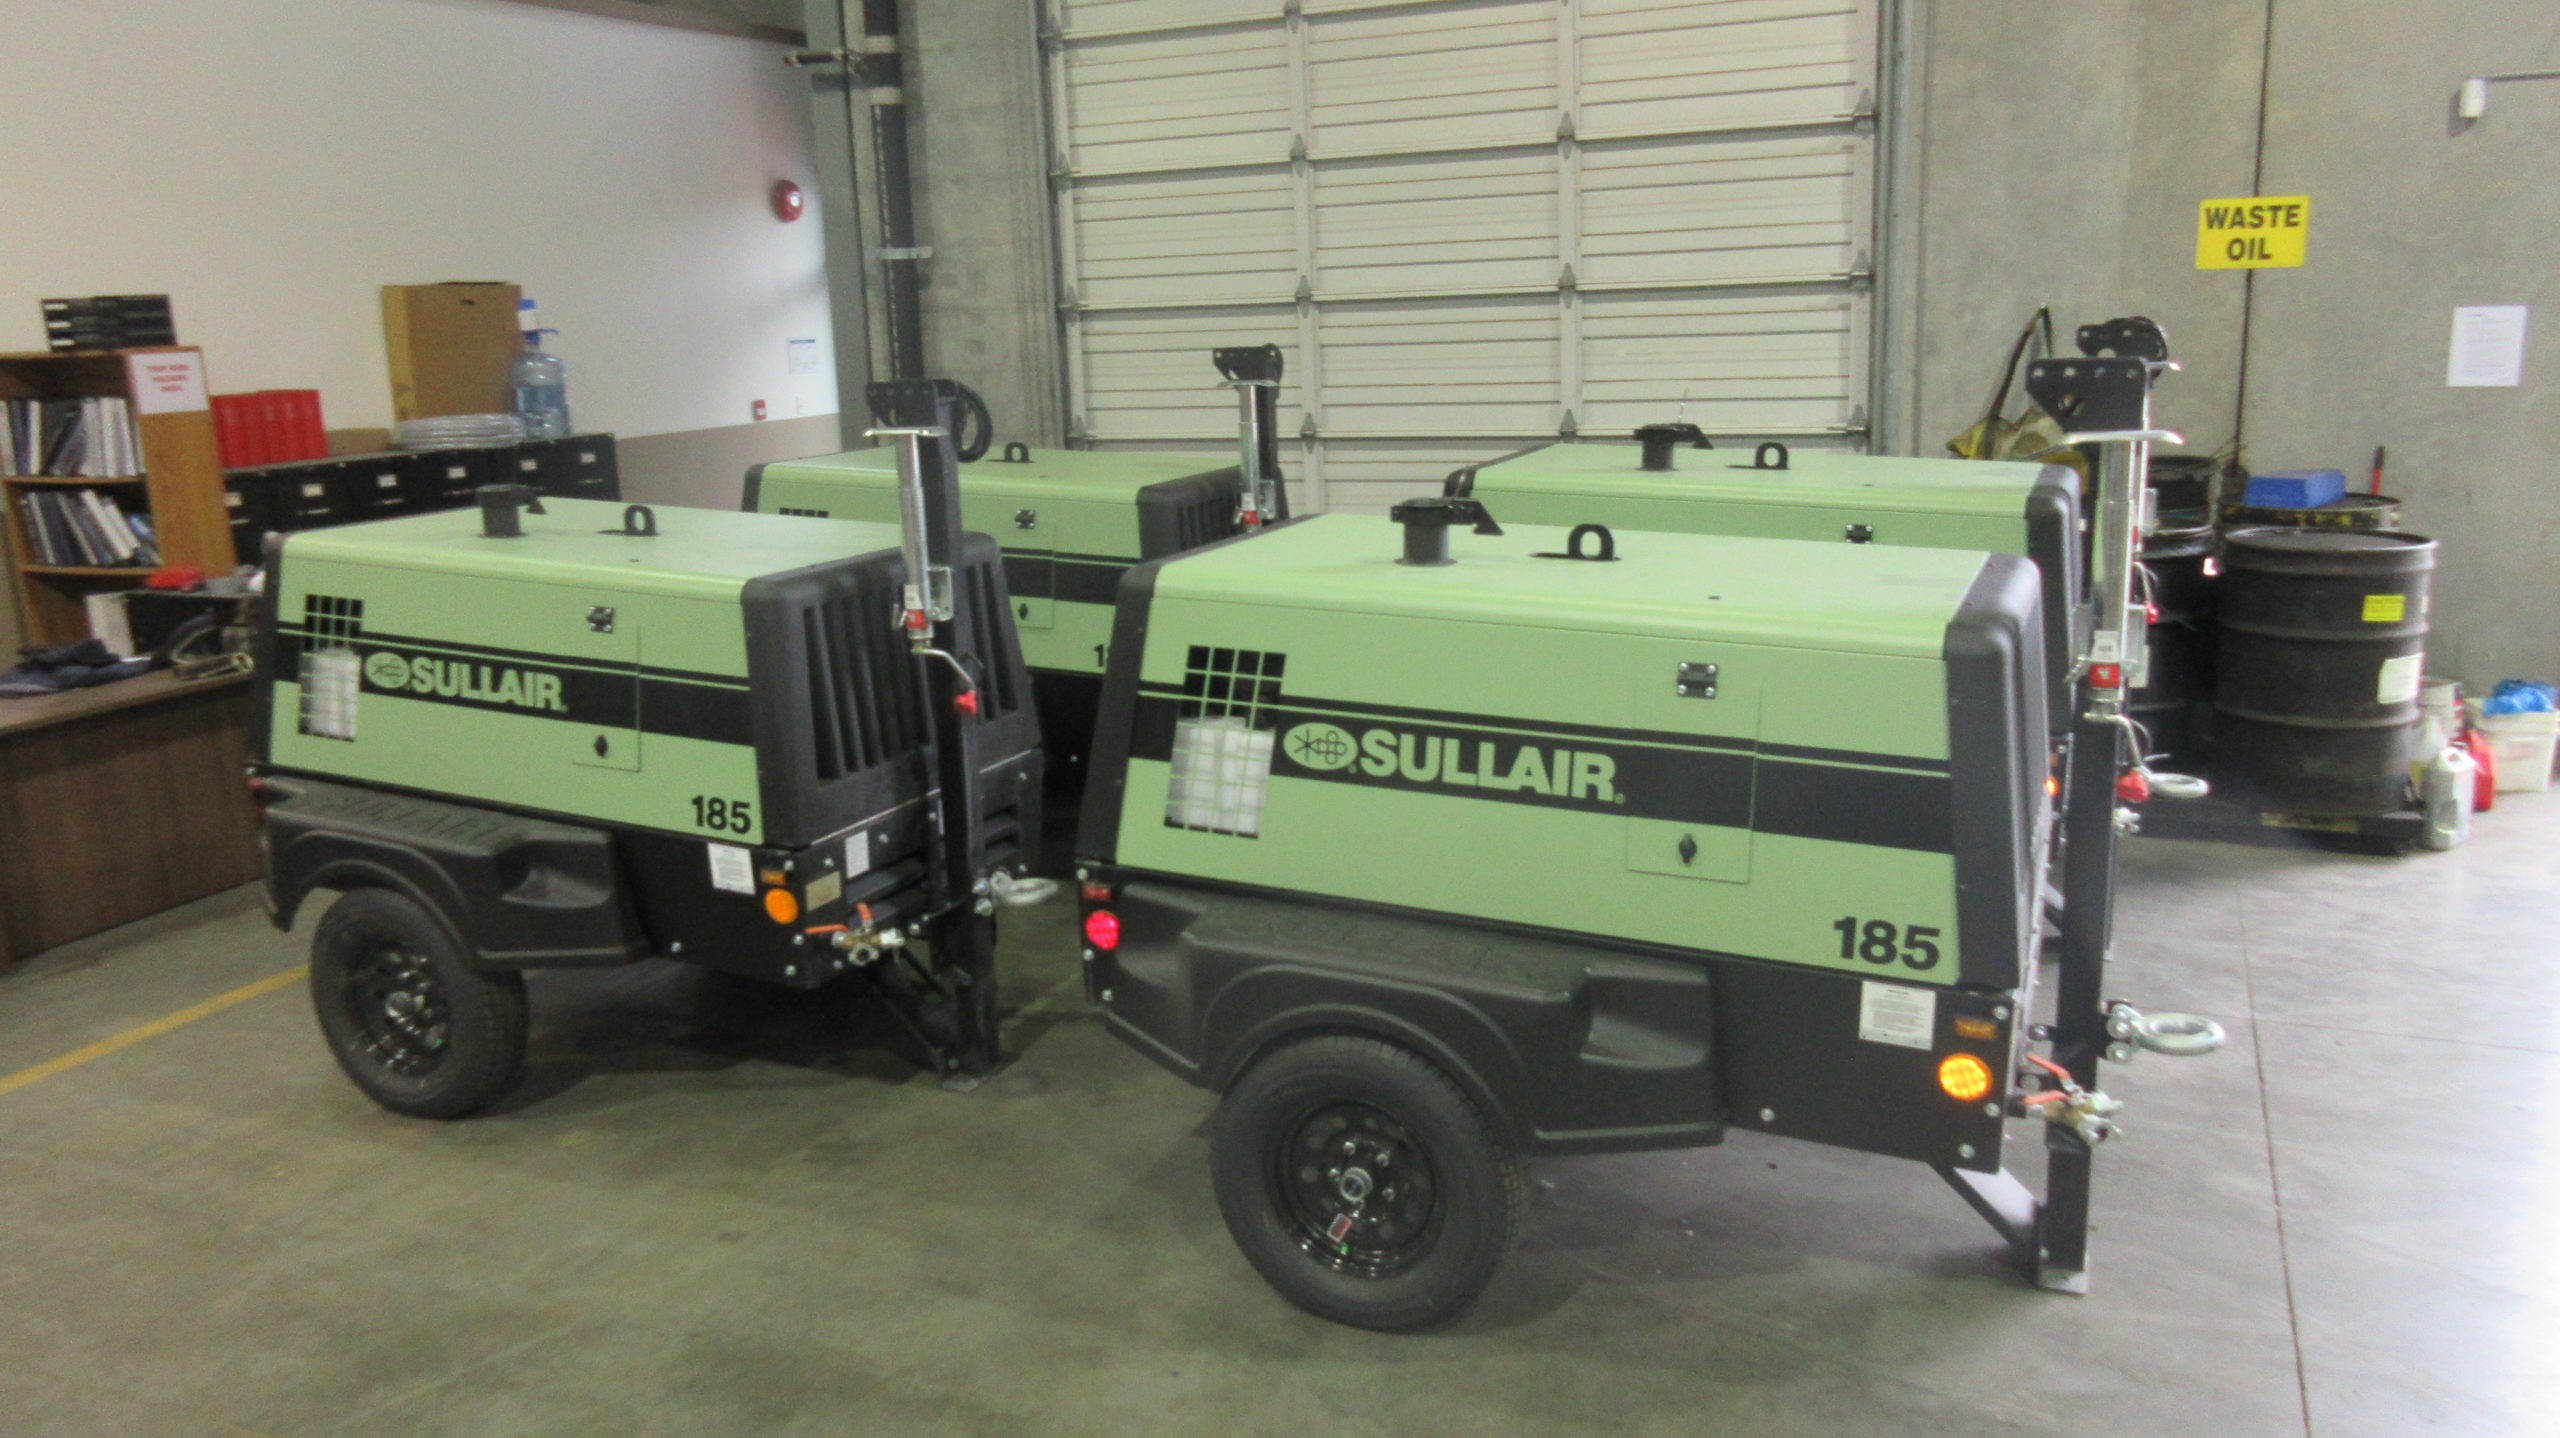 Four Sullair air compressors in warehouse